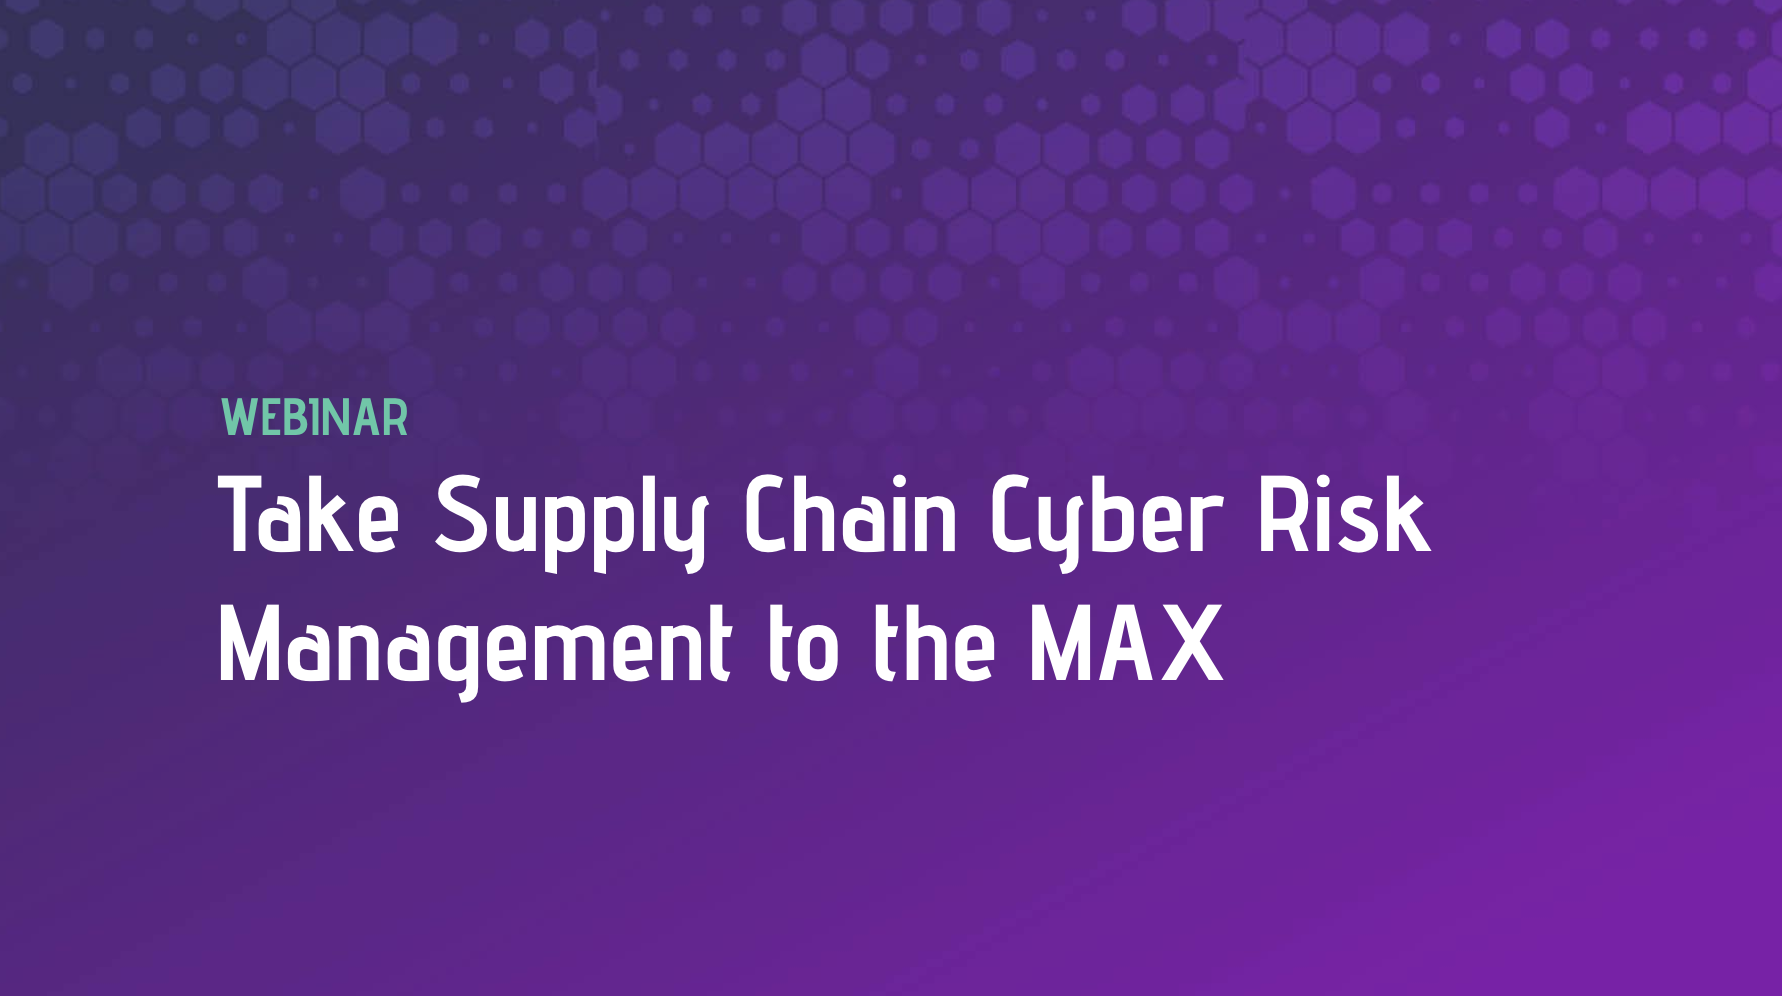 Take Supply Chain Cyber Risk Management to the MAX